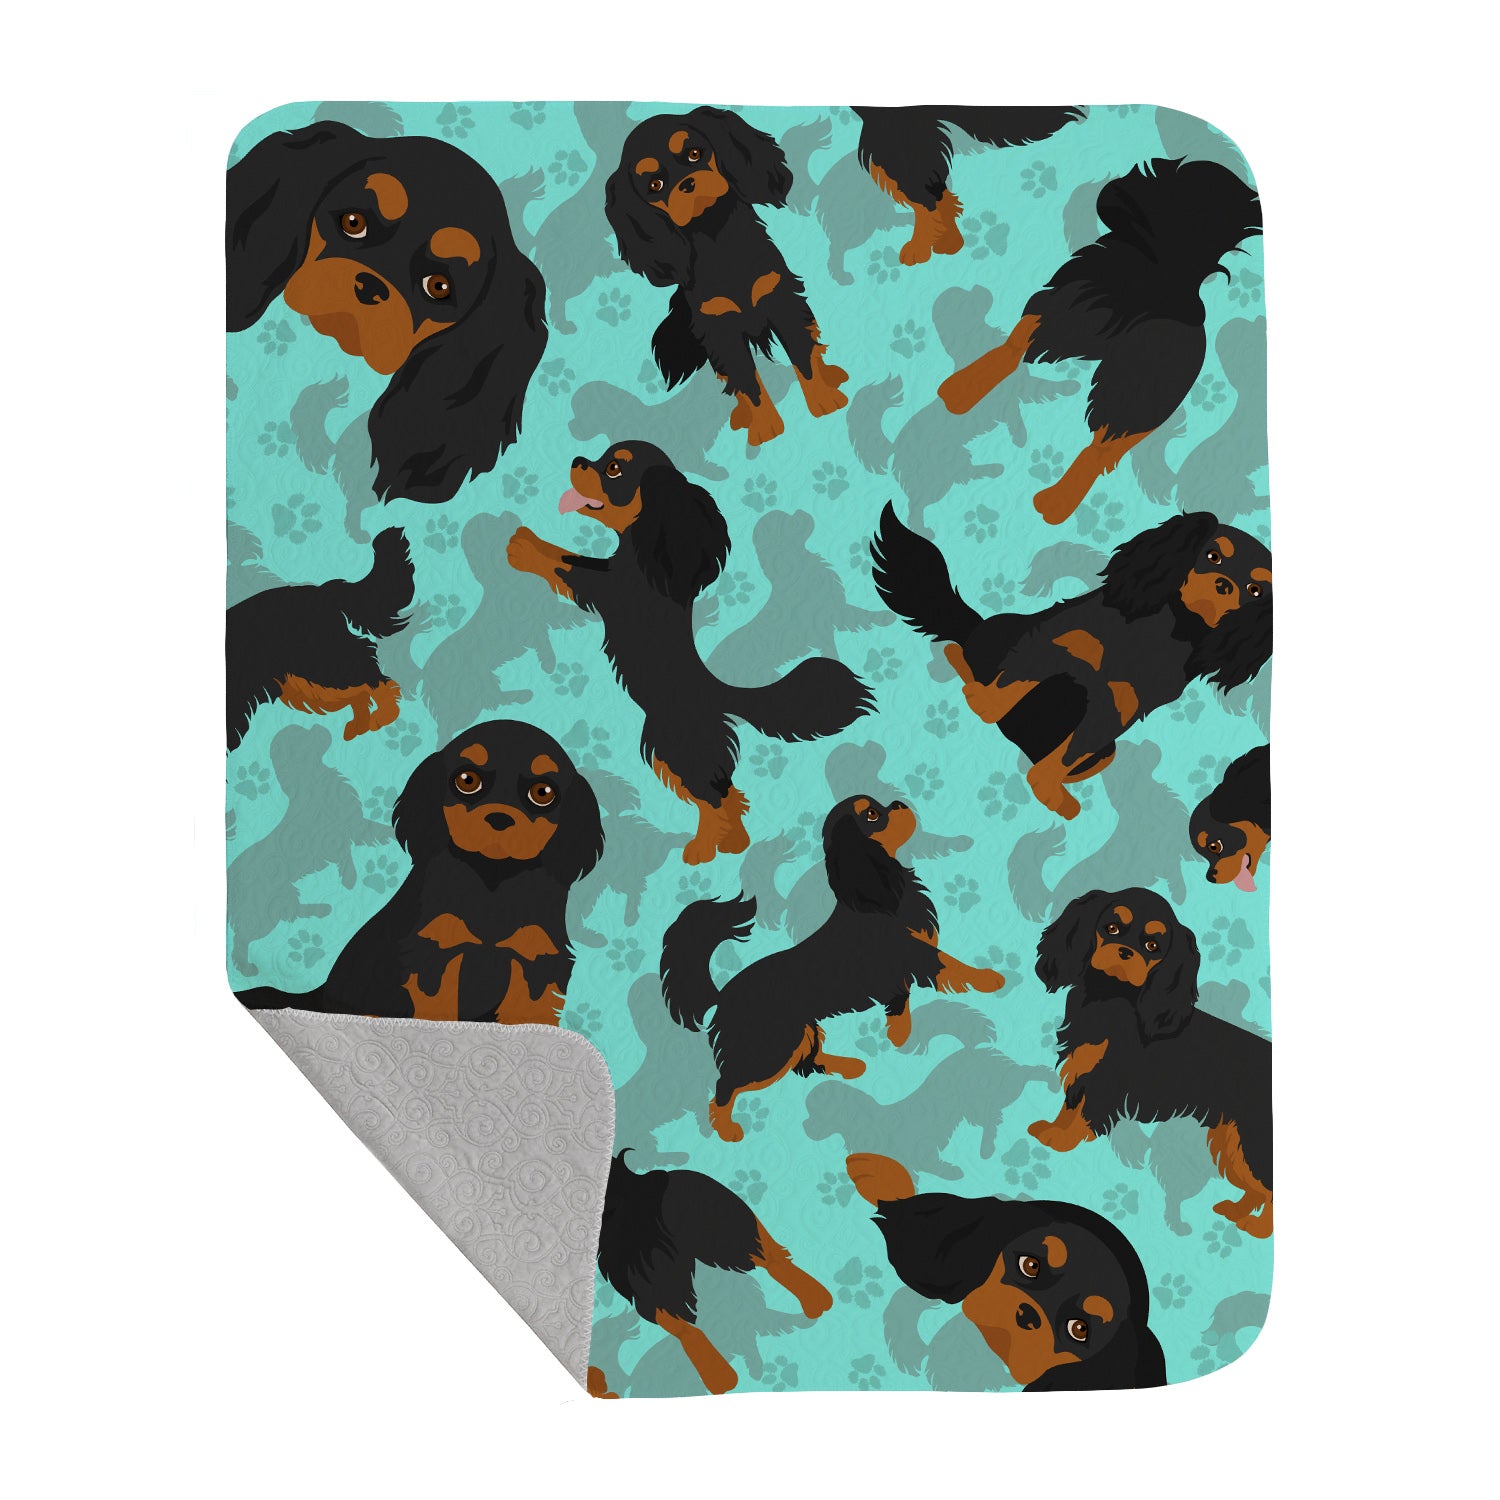 Buy this Black and Tan Cavalier King Charles Spaniel Quilted Blanket 50x60